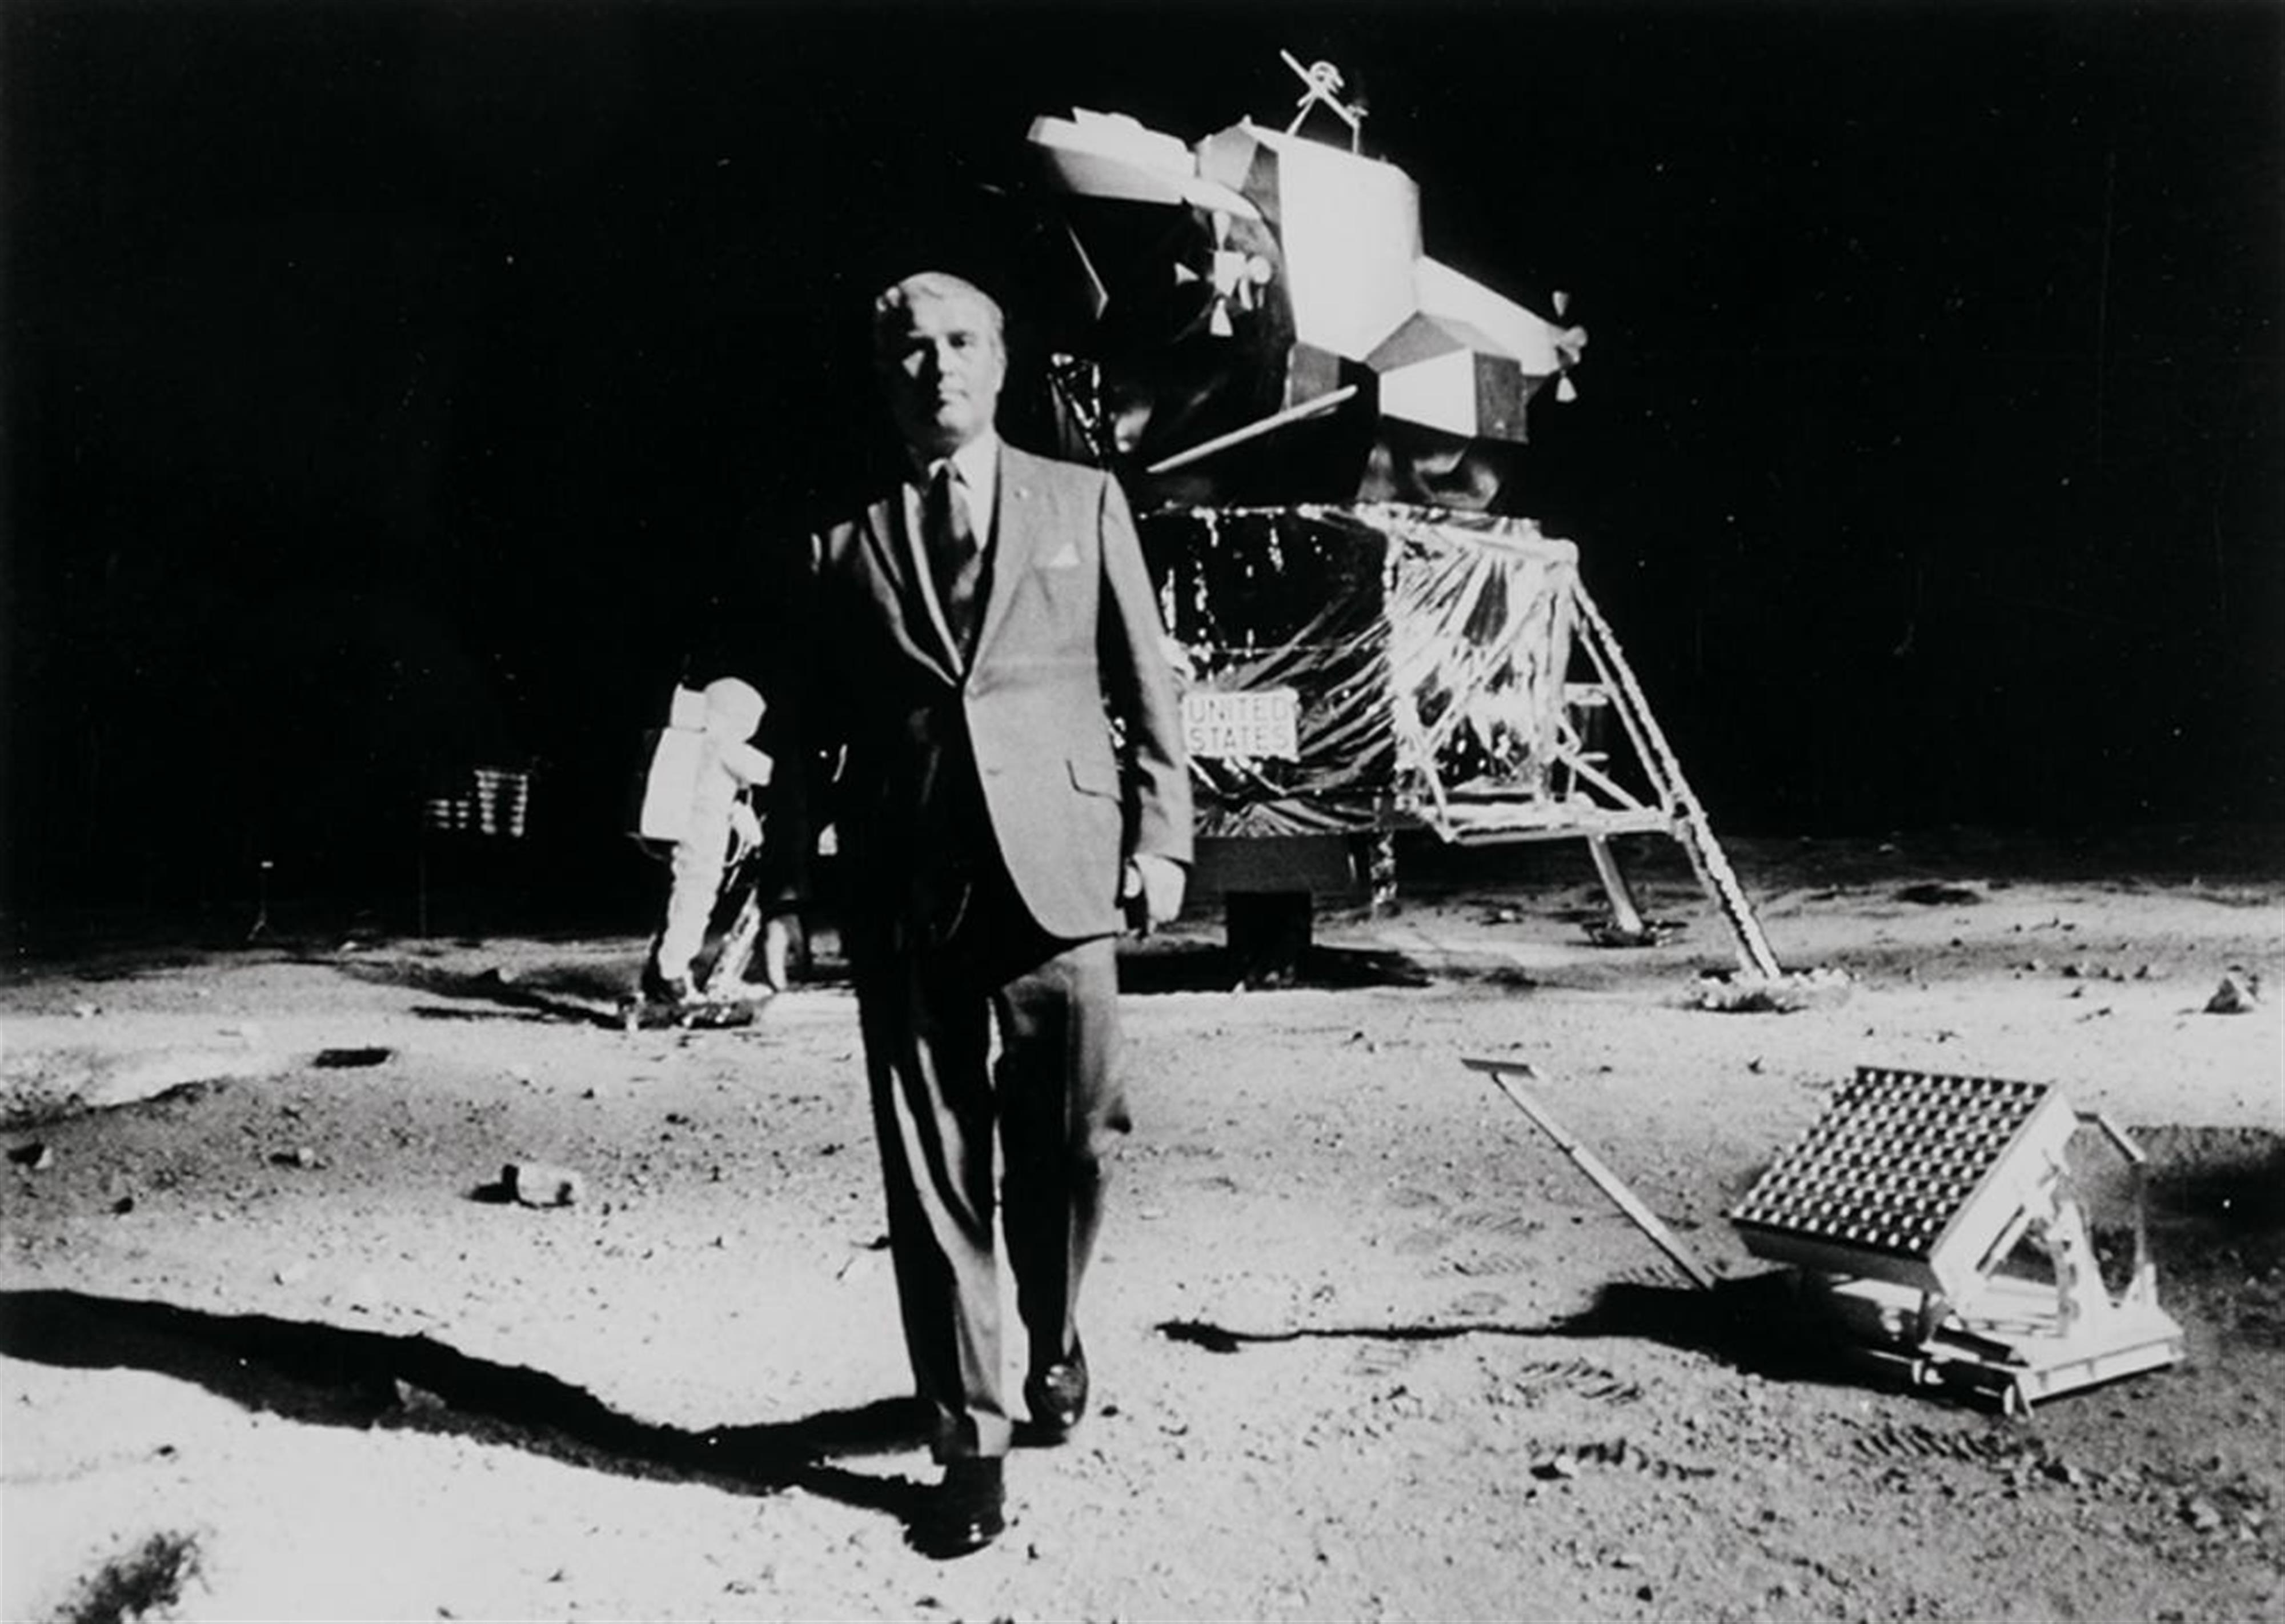 NASA - Dr. Wernher von Braun, one of the leaders in America's space flight program, took a walk on the Moon - image-1